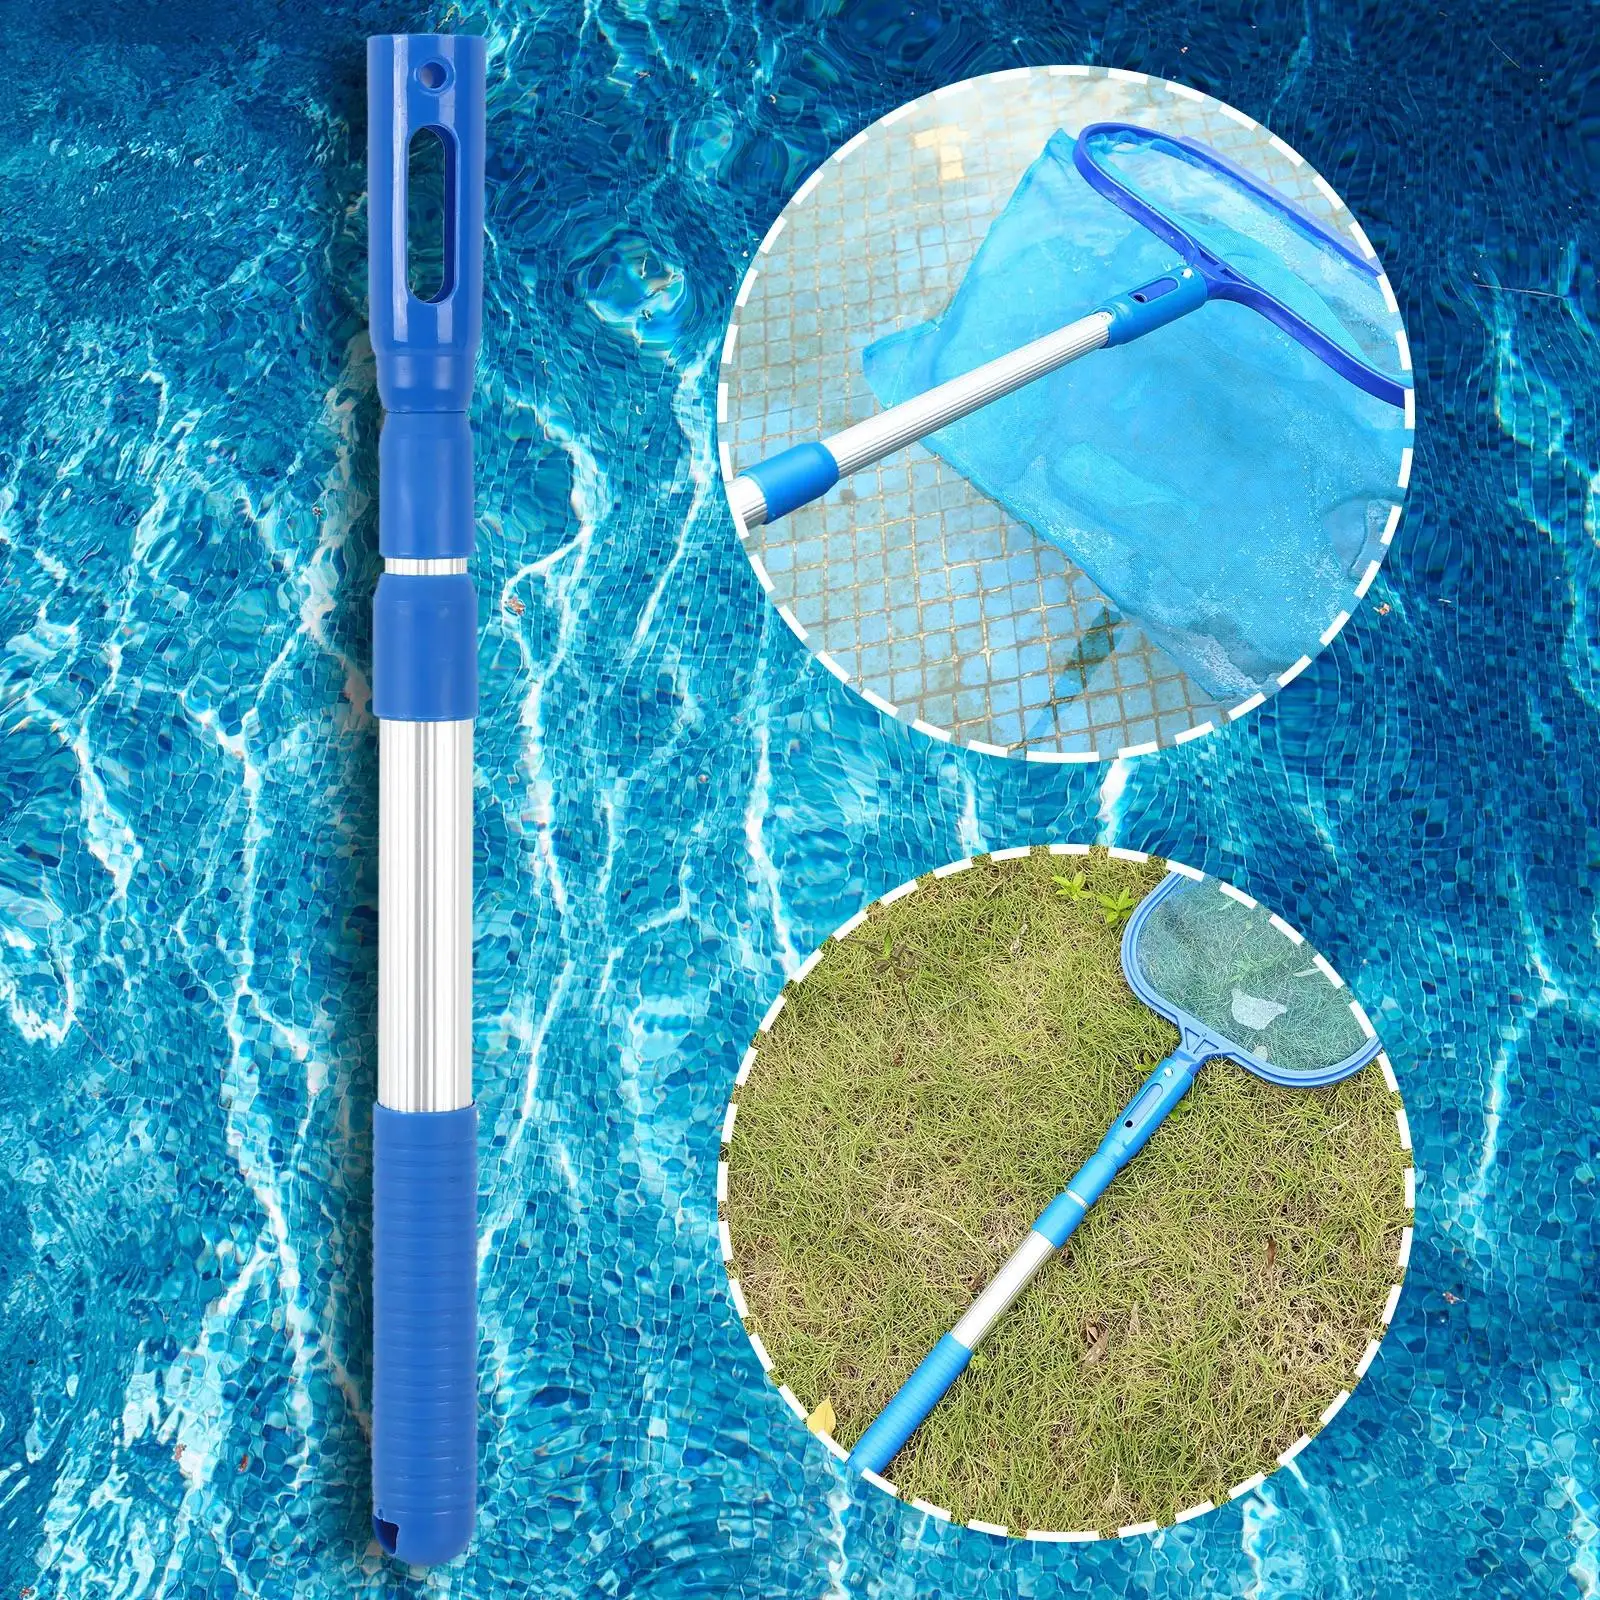 Multipurpose Pool Handle Adjustable Length Durable 440-1130mm 3 Stage Strong Telescopic Lightweight Pool Rod for Vacuum Heads